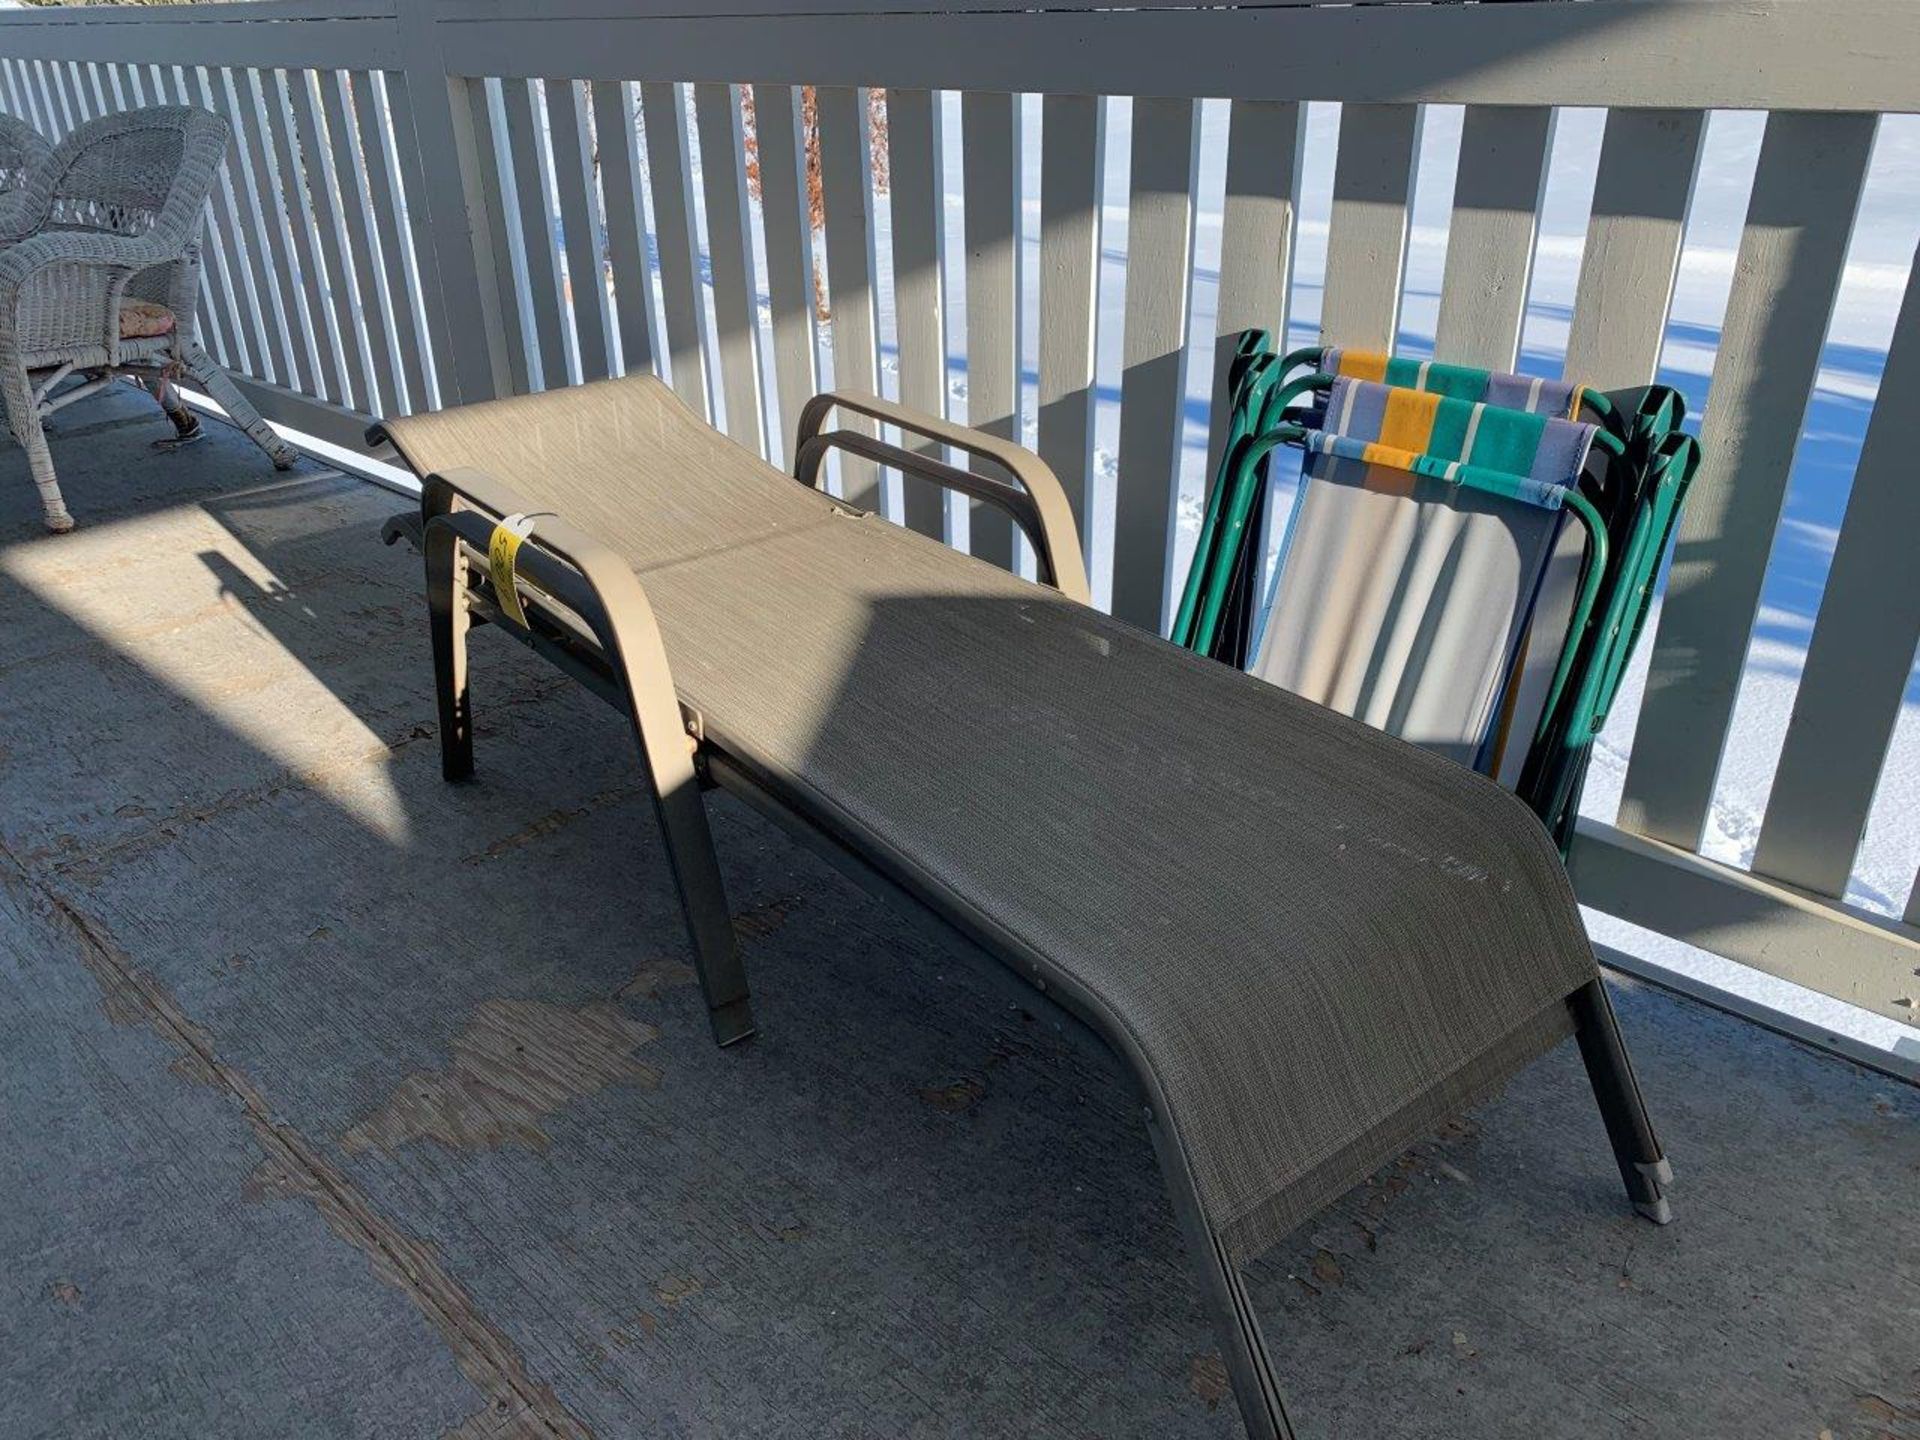 2-PATIO LOUNGE CHAIRS AND 2-FOLDING CHAIRS - Image 2 of 2